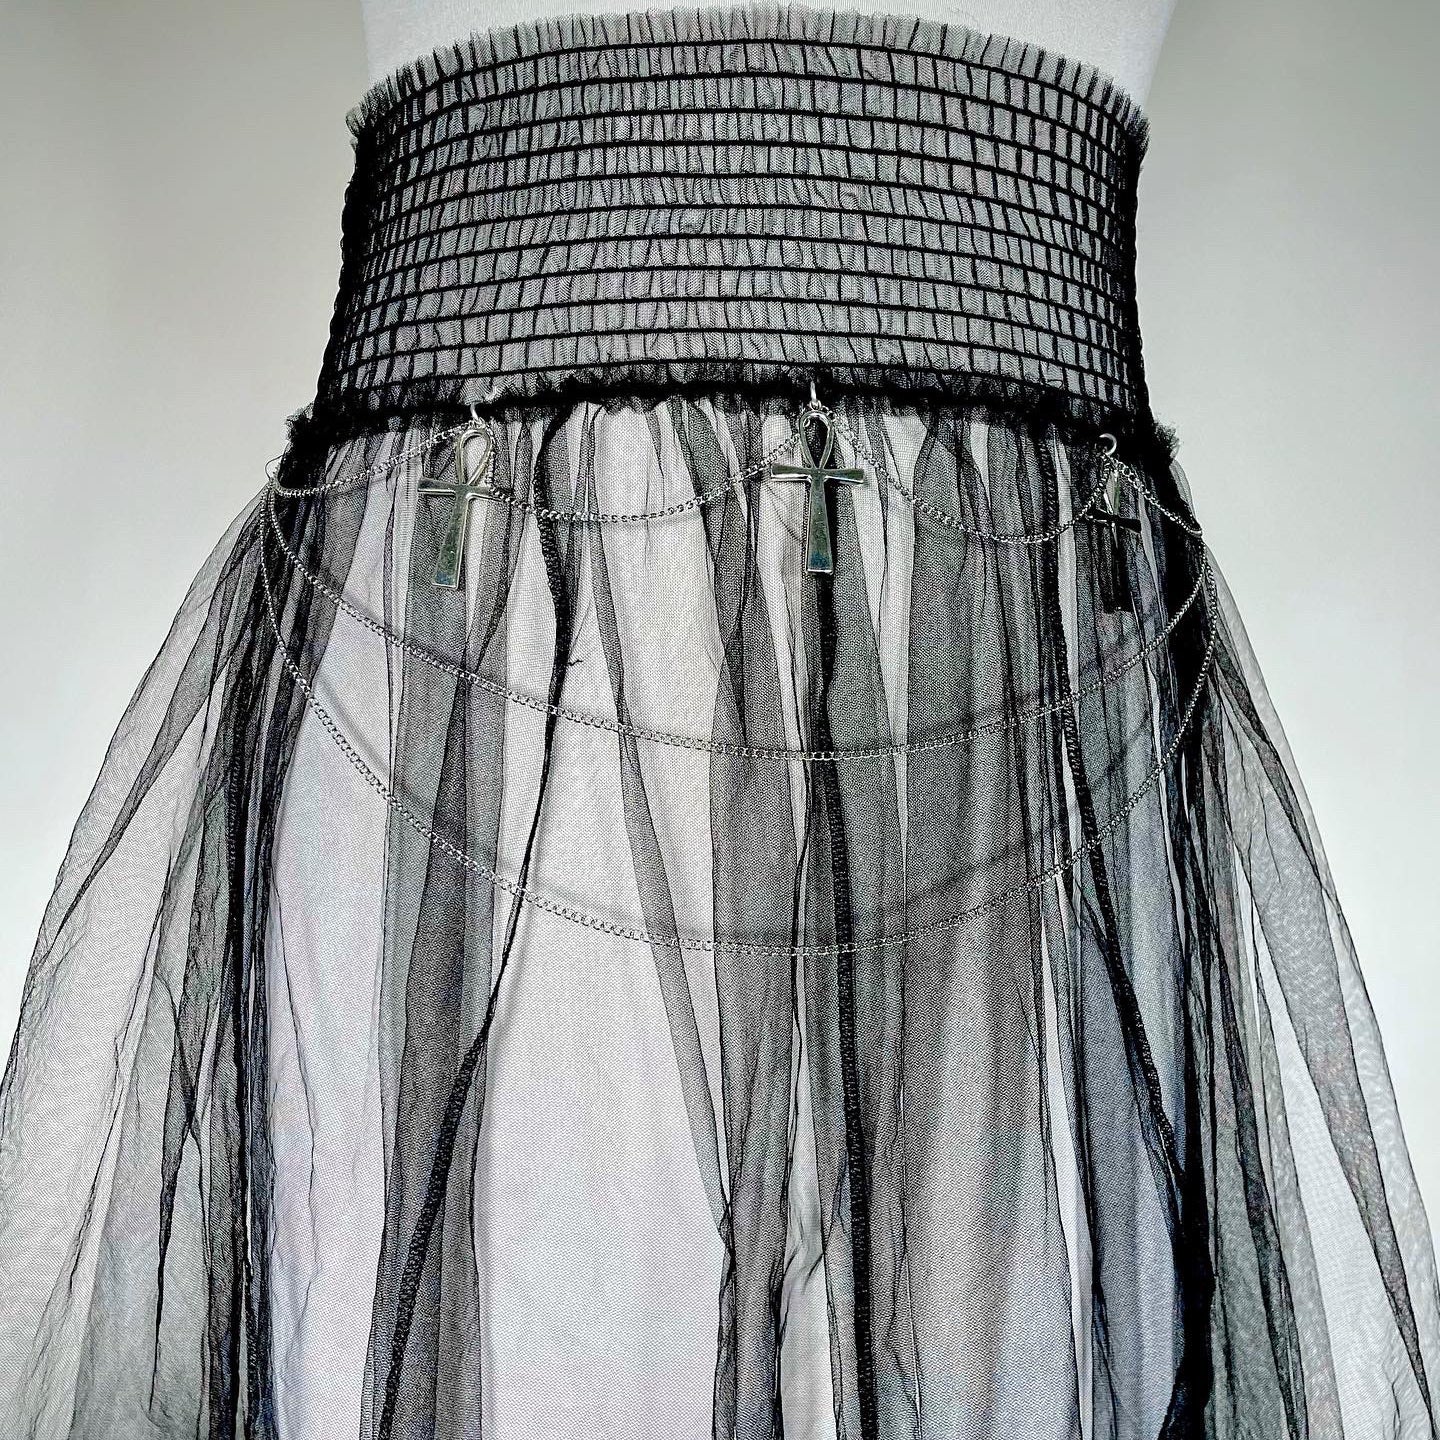 Sheer Tulle Maxi Skirt with Ankhs and Chains